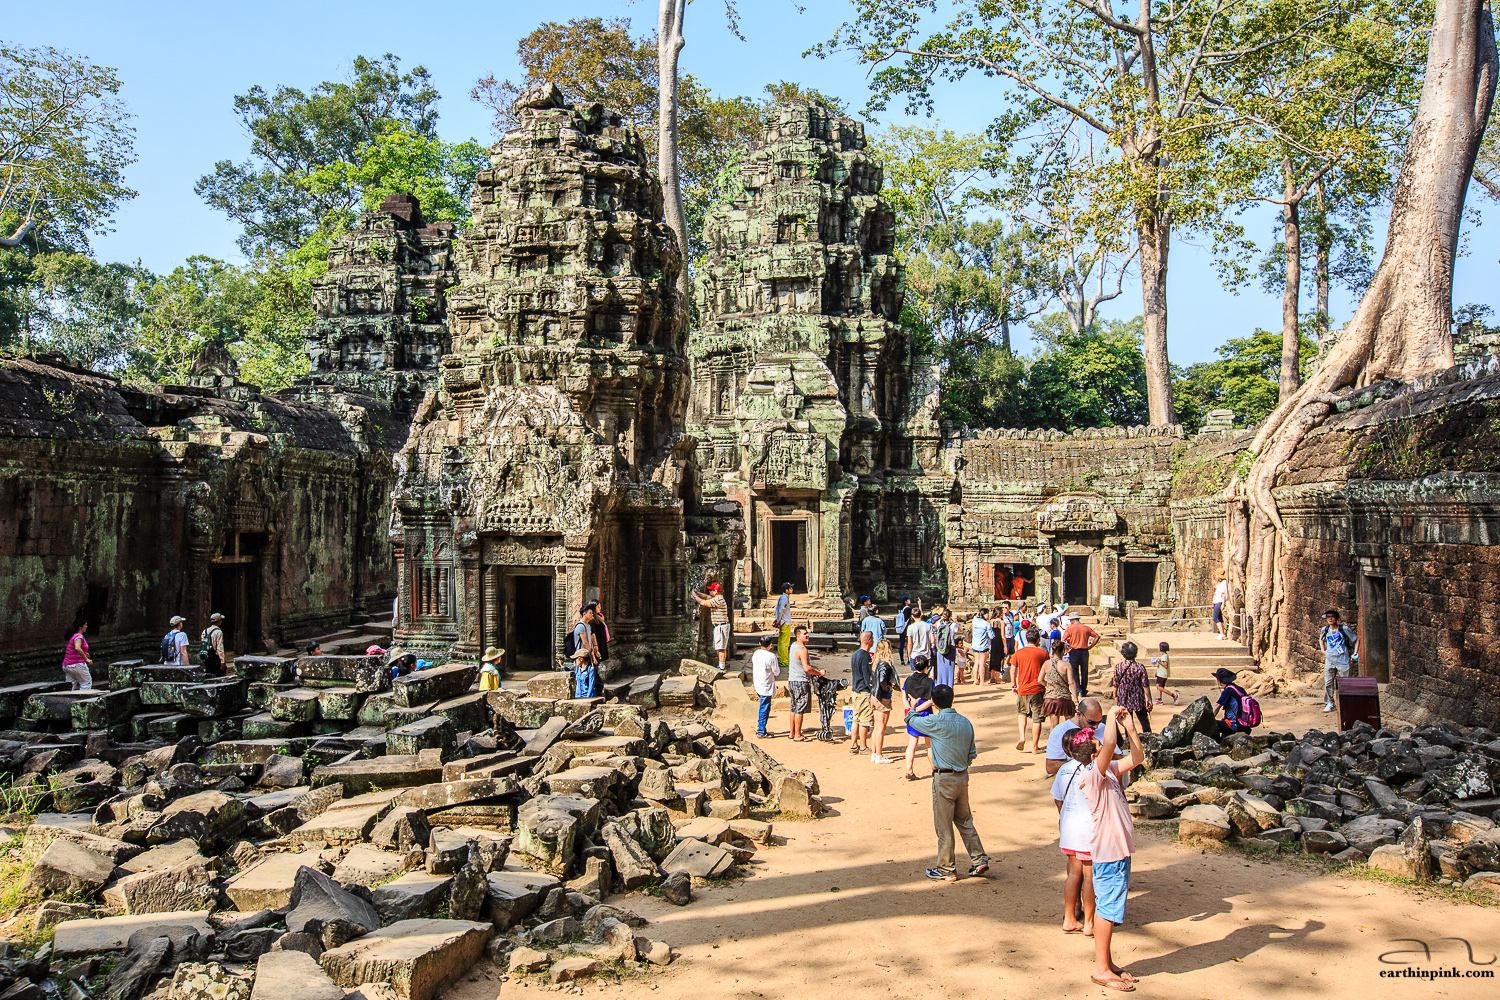 The Ta Prohm temple - famous for being featured in the movie Tomb Raider, and quite a sight even regardless of its Hollywood fame.